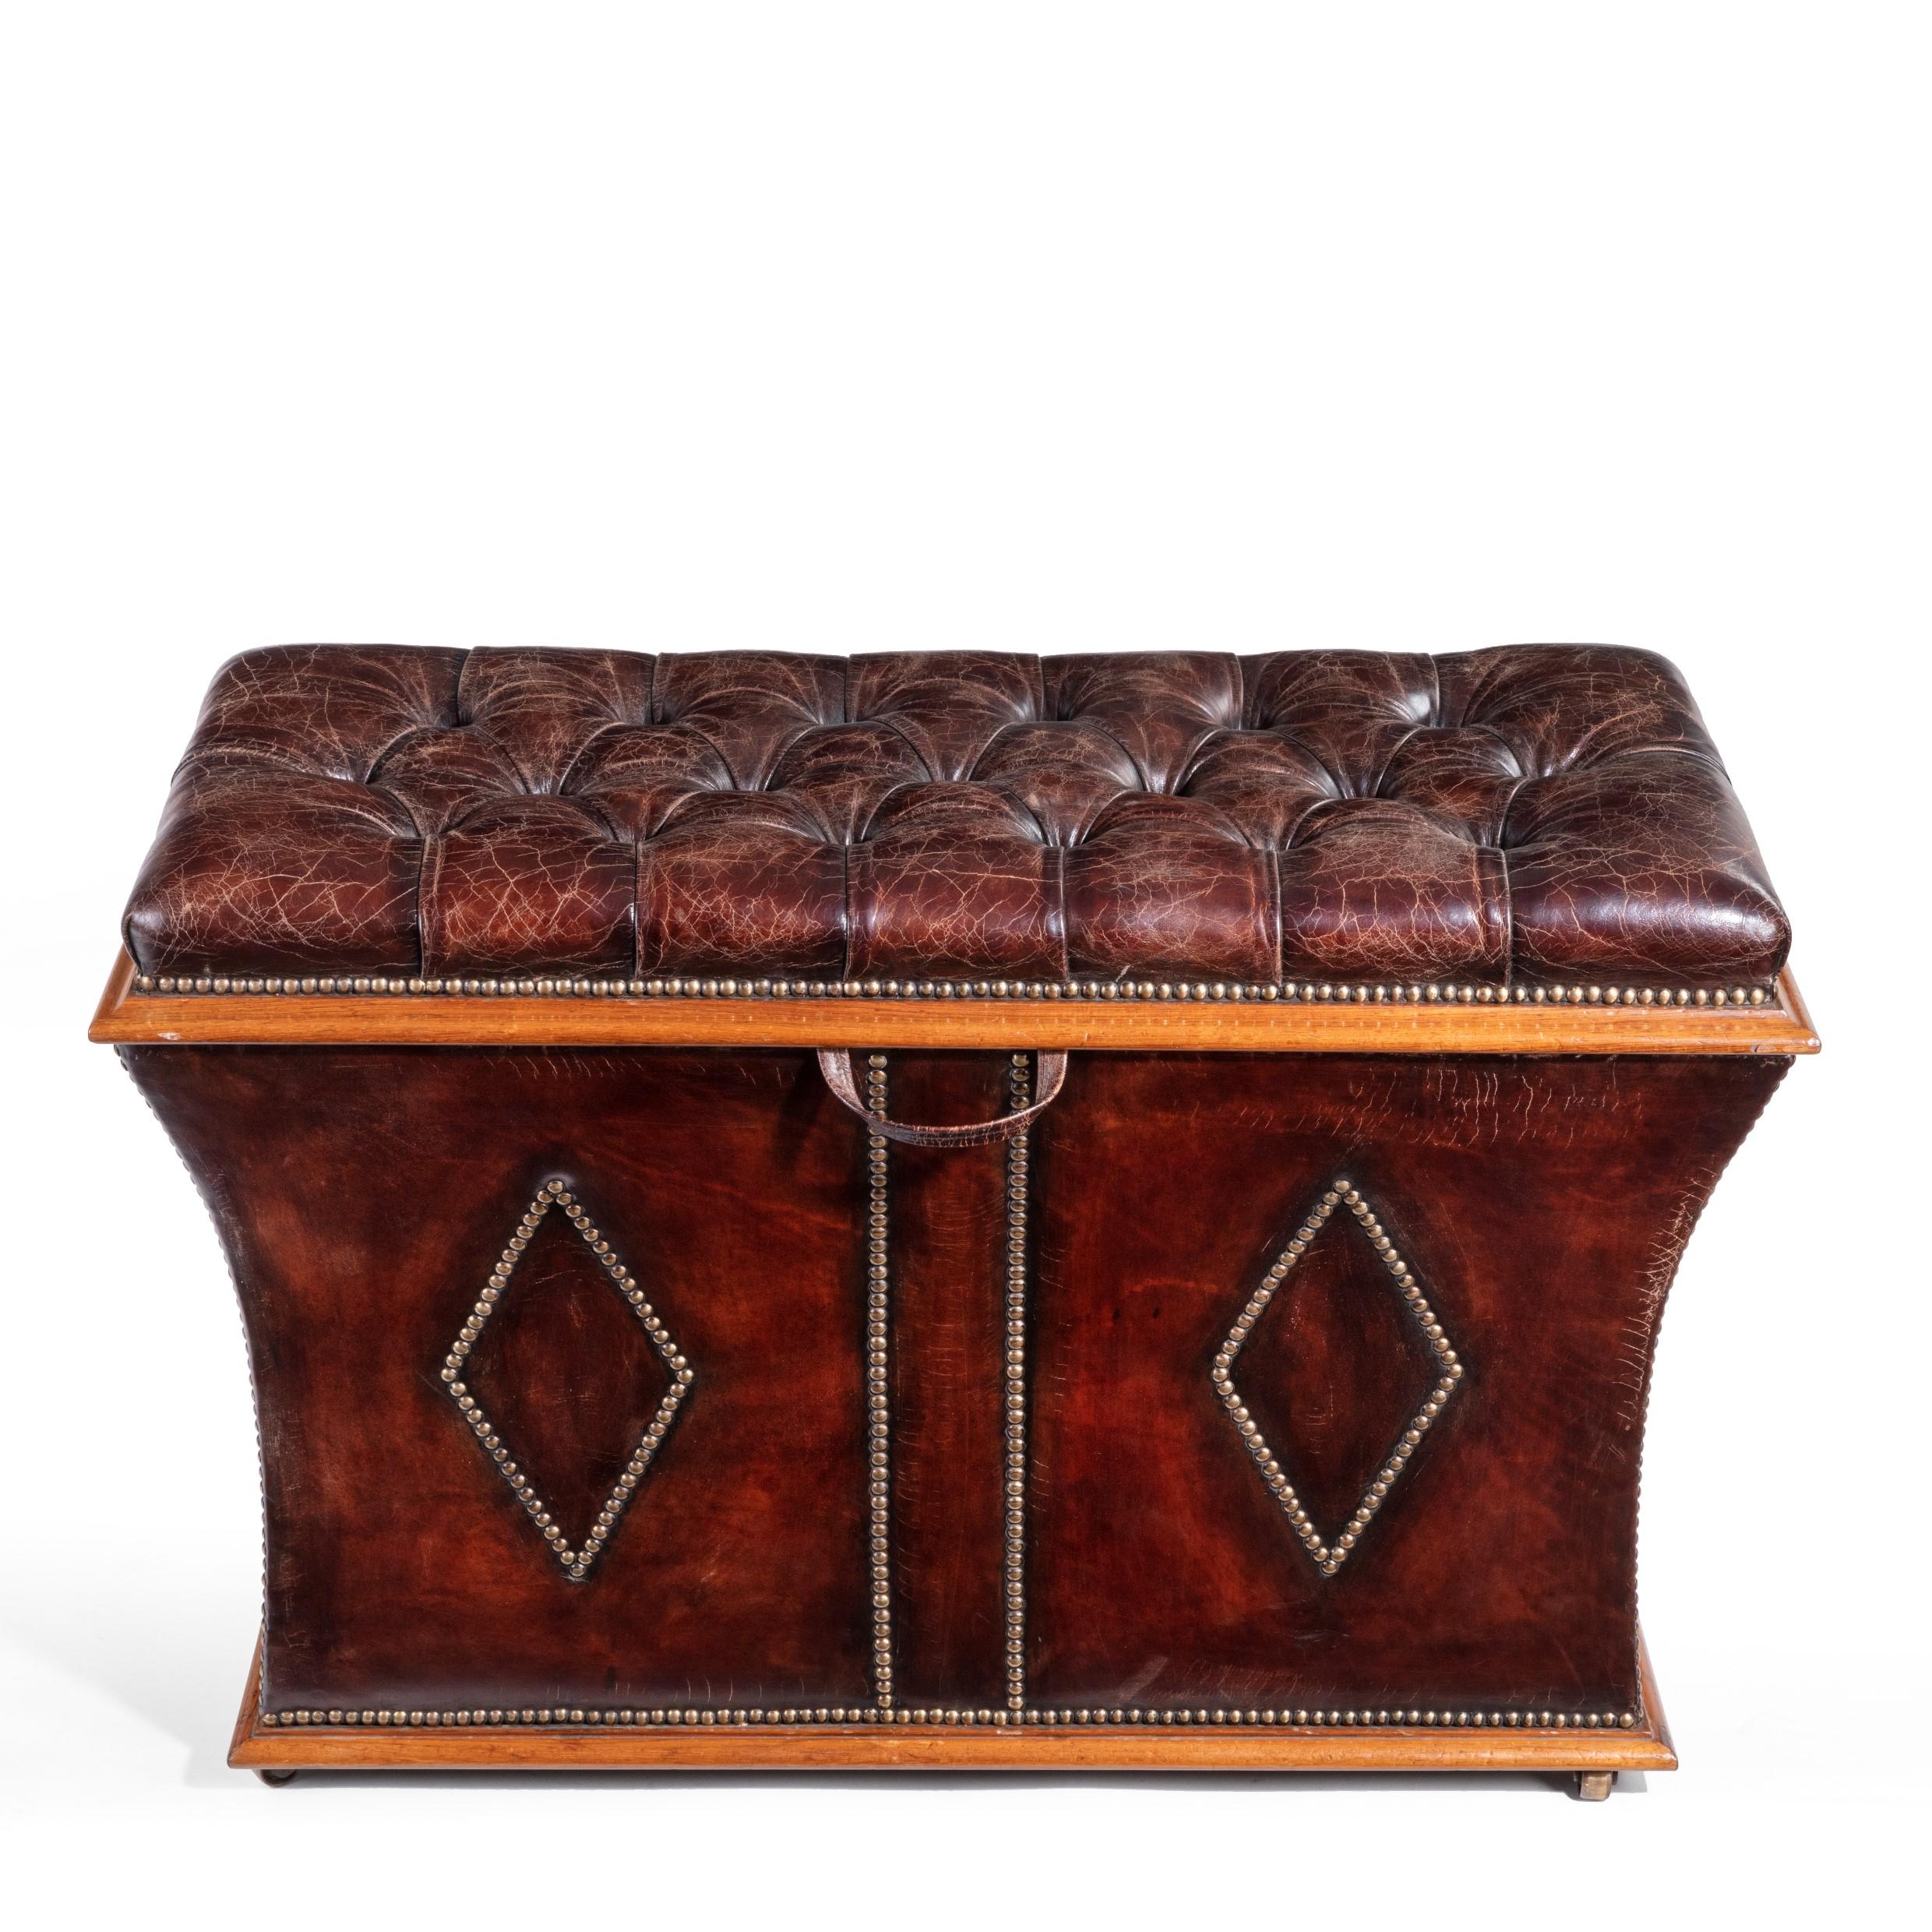 An unusual shaped William llll rosewood framed box ottoman with deep buttoned rising seat.
Recovered in distressed burgundy leather. English, circa 1835.

Measures: H 24

W 37

D 17 1/2

£2250.